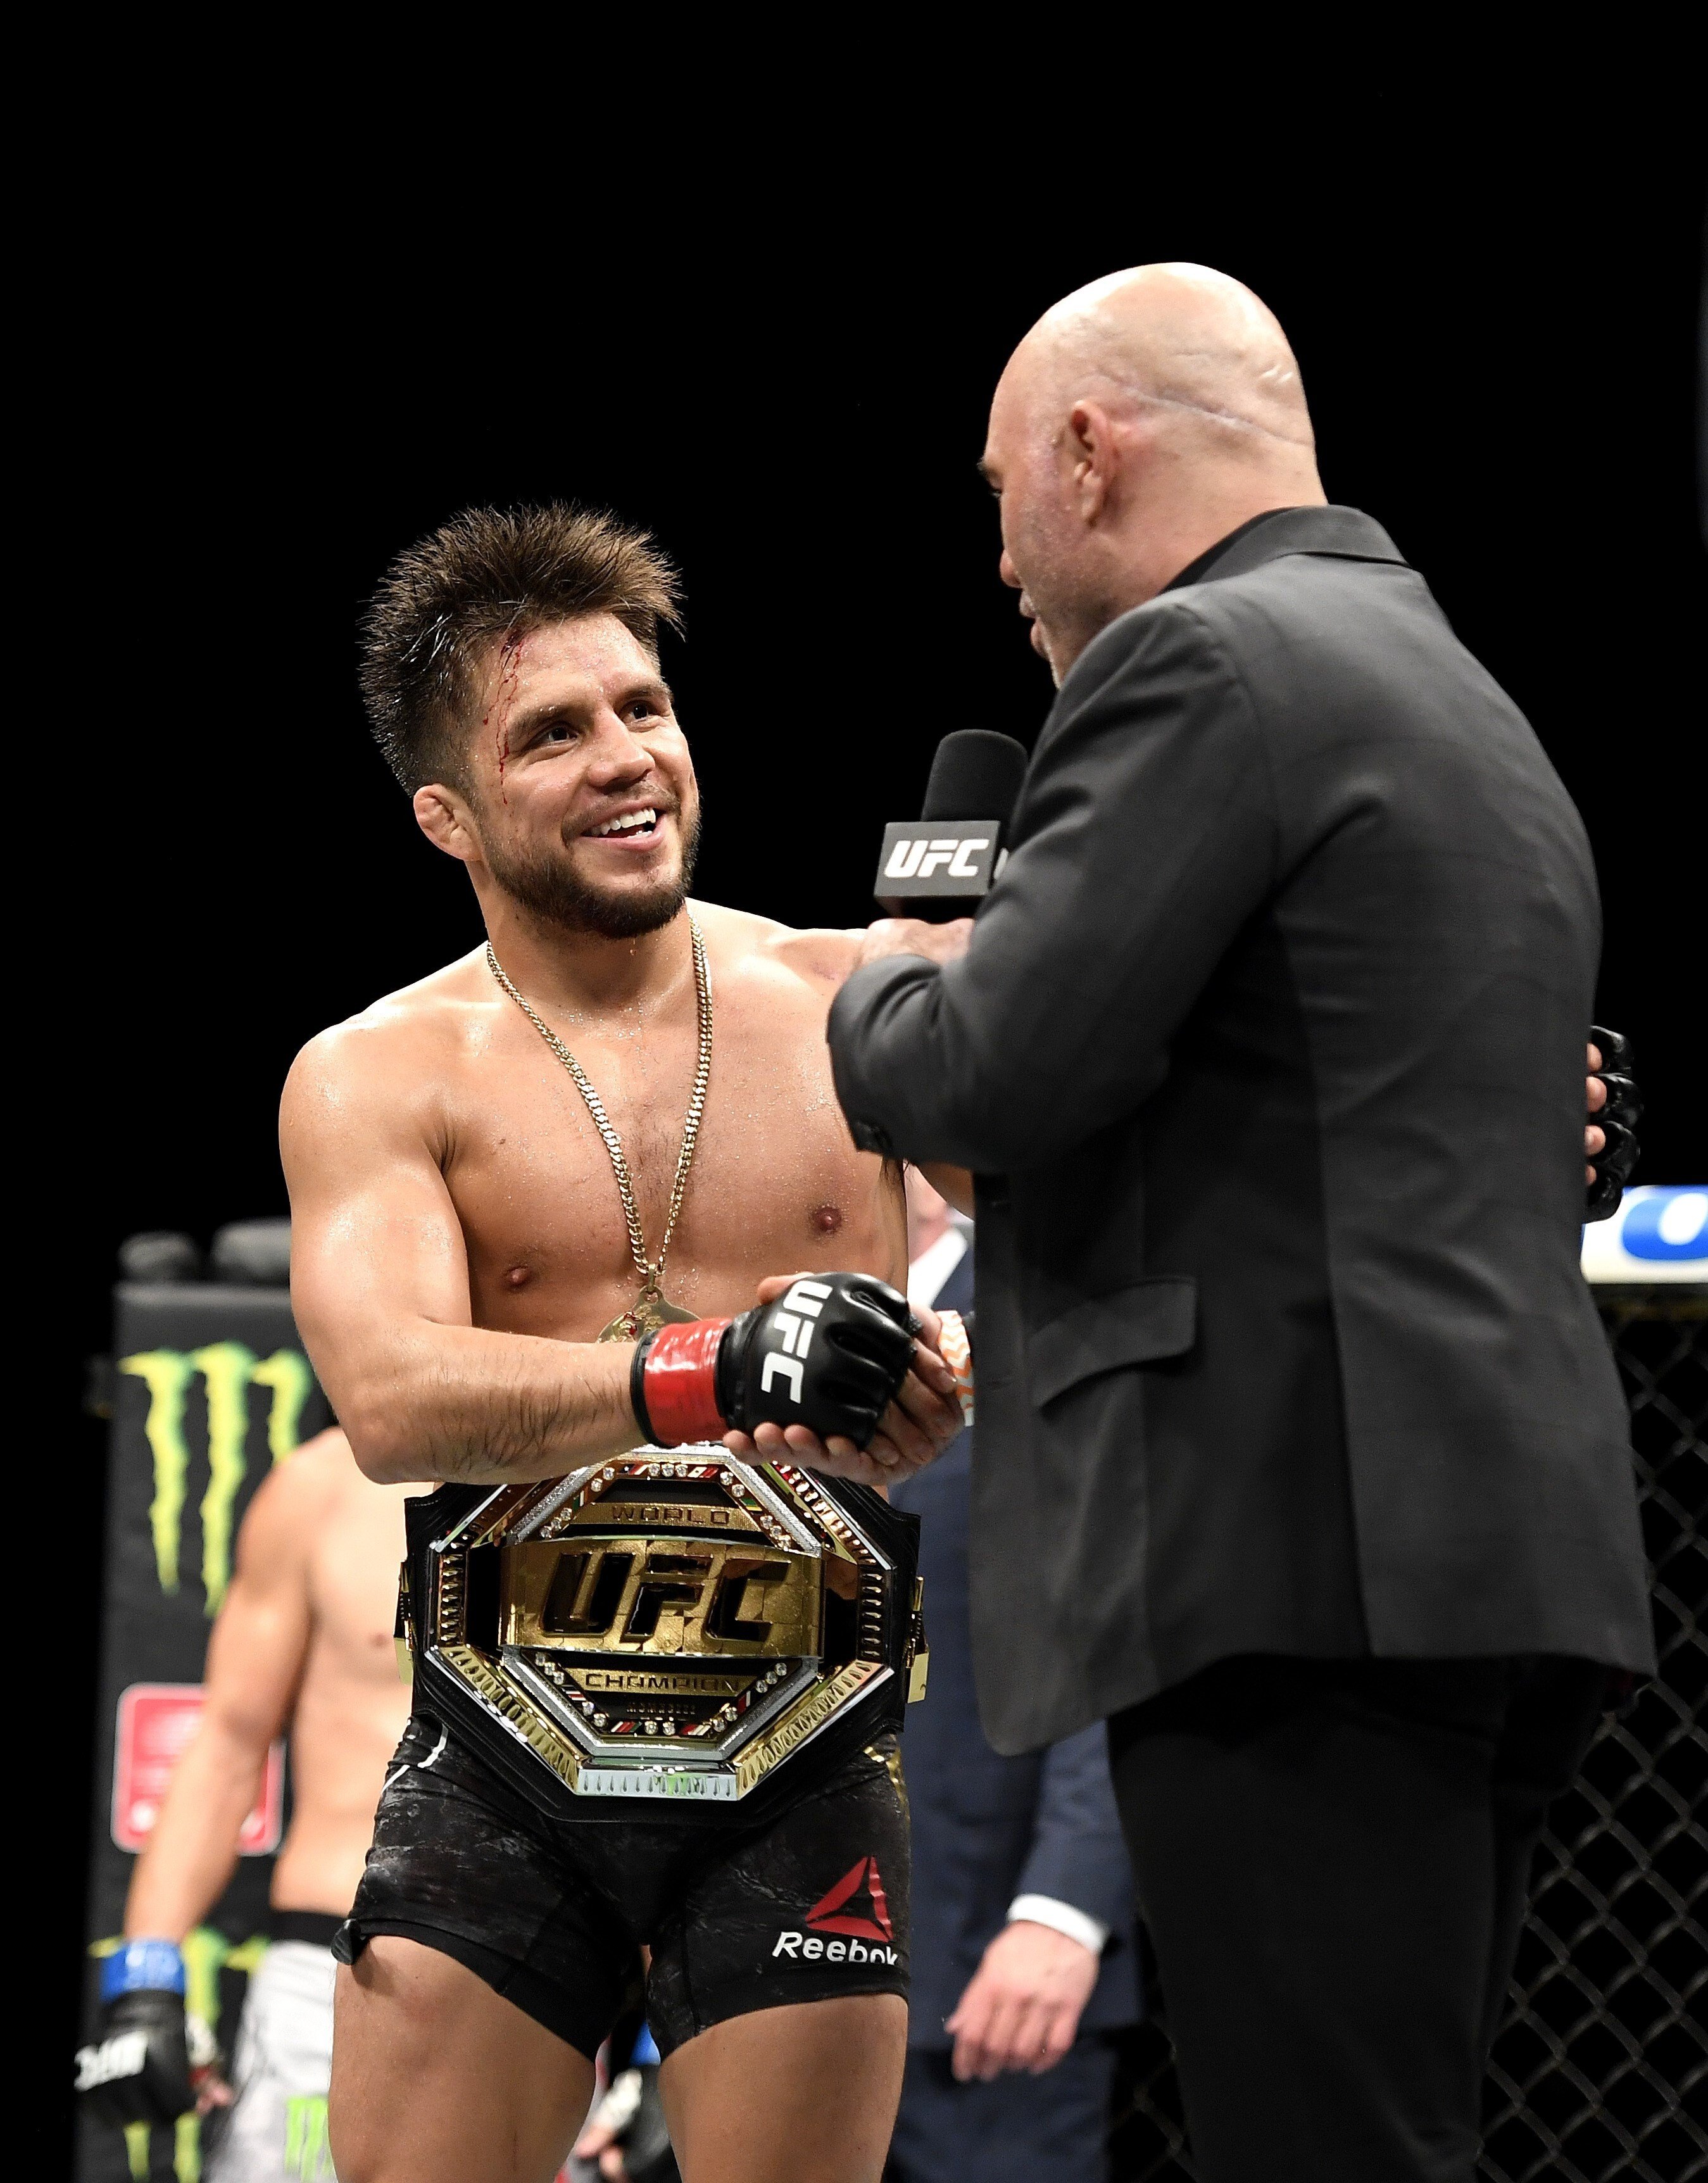 Henry Cejudo shakes hands with UFC analyst Joe Rogan after defending his bantamweight title against Dominick Cruz at UFC 249 at the VyStar Veterans Memorial Arena in Jacksonville, Florida in May. Photo: AFP